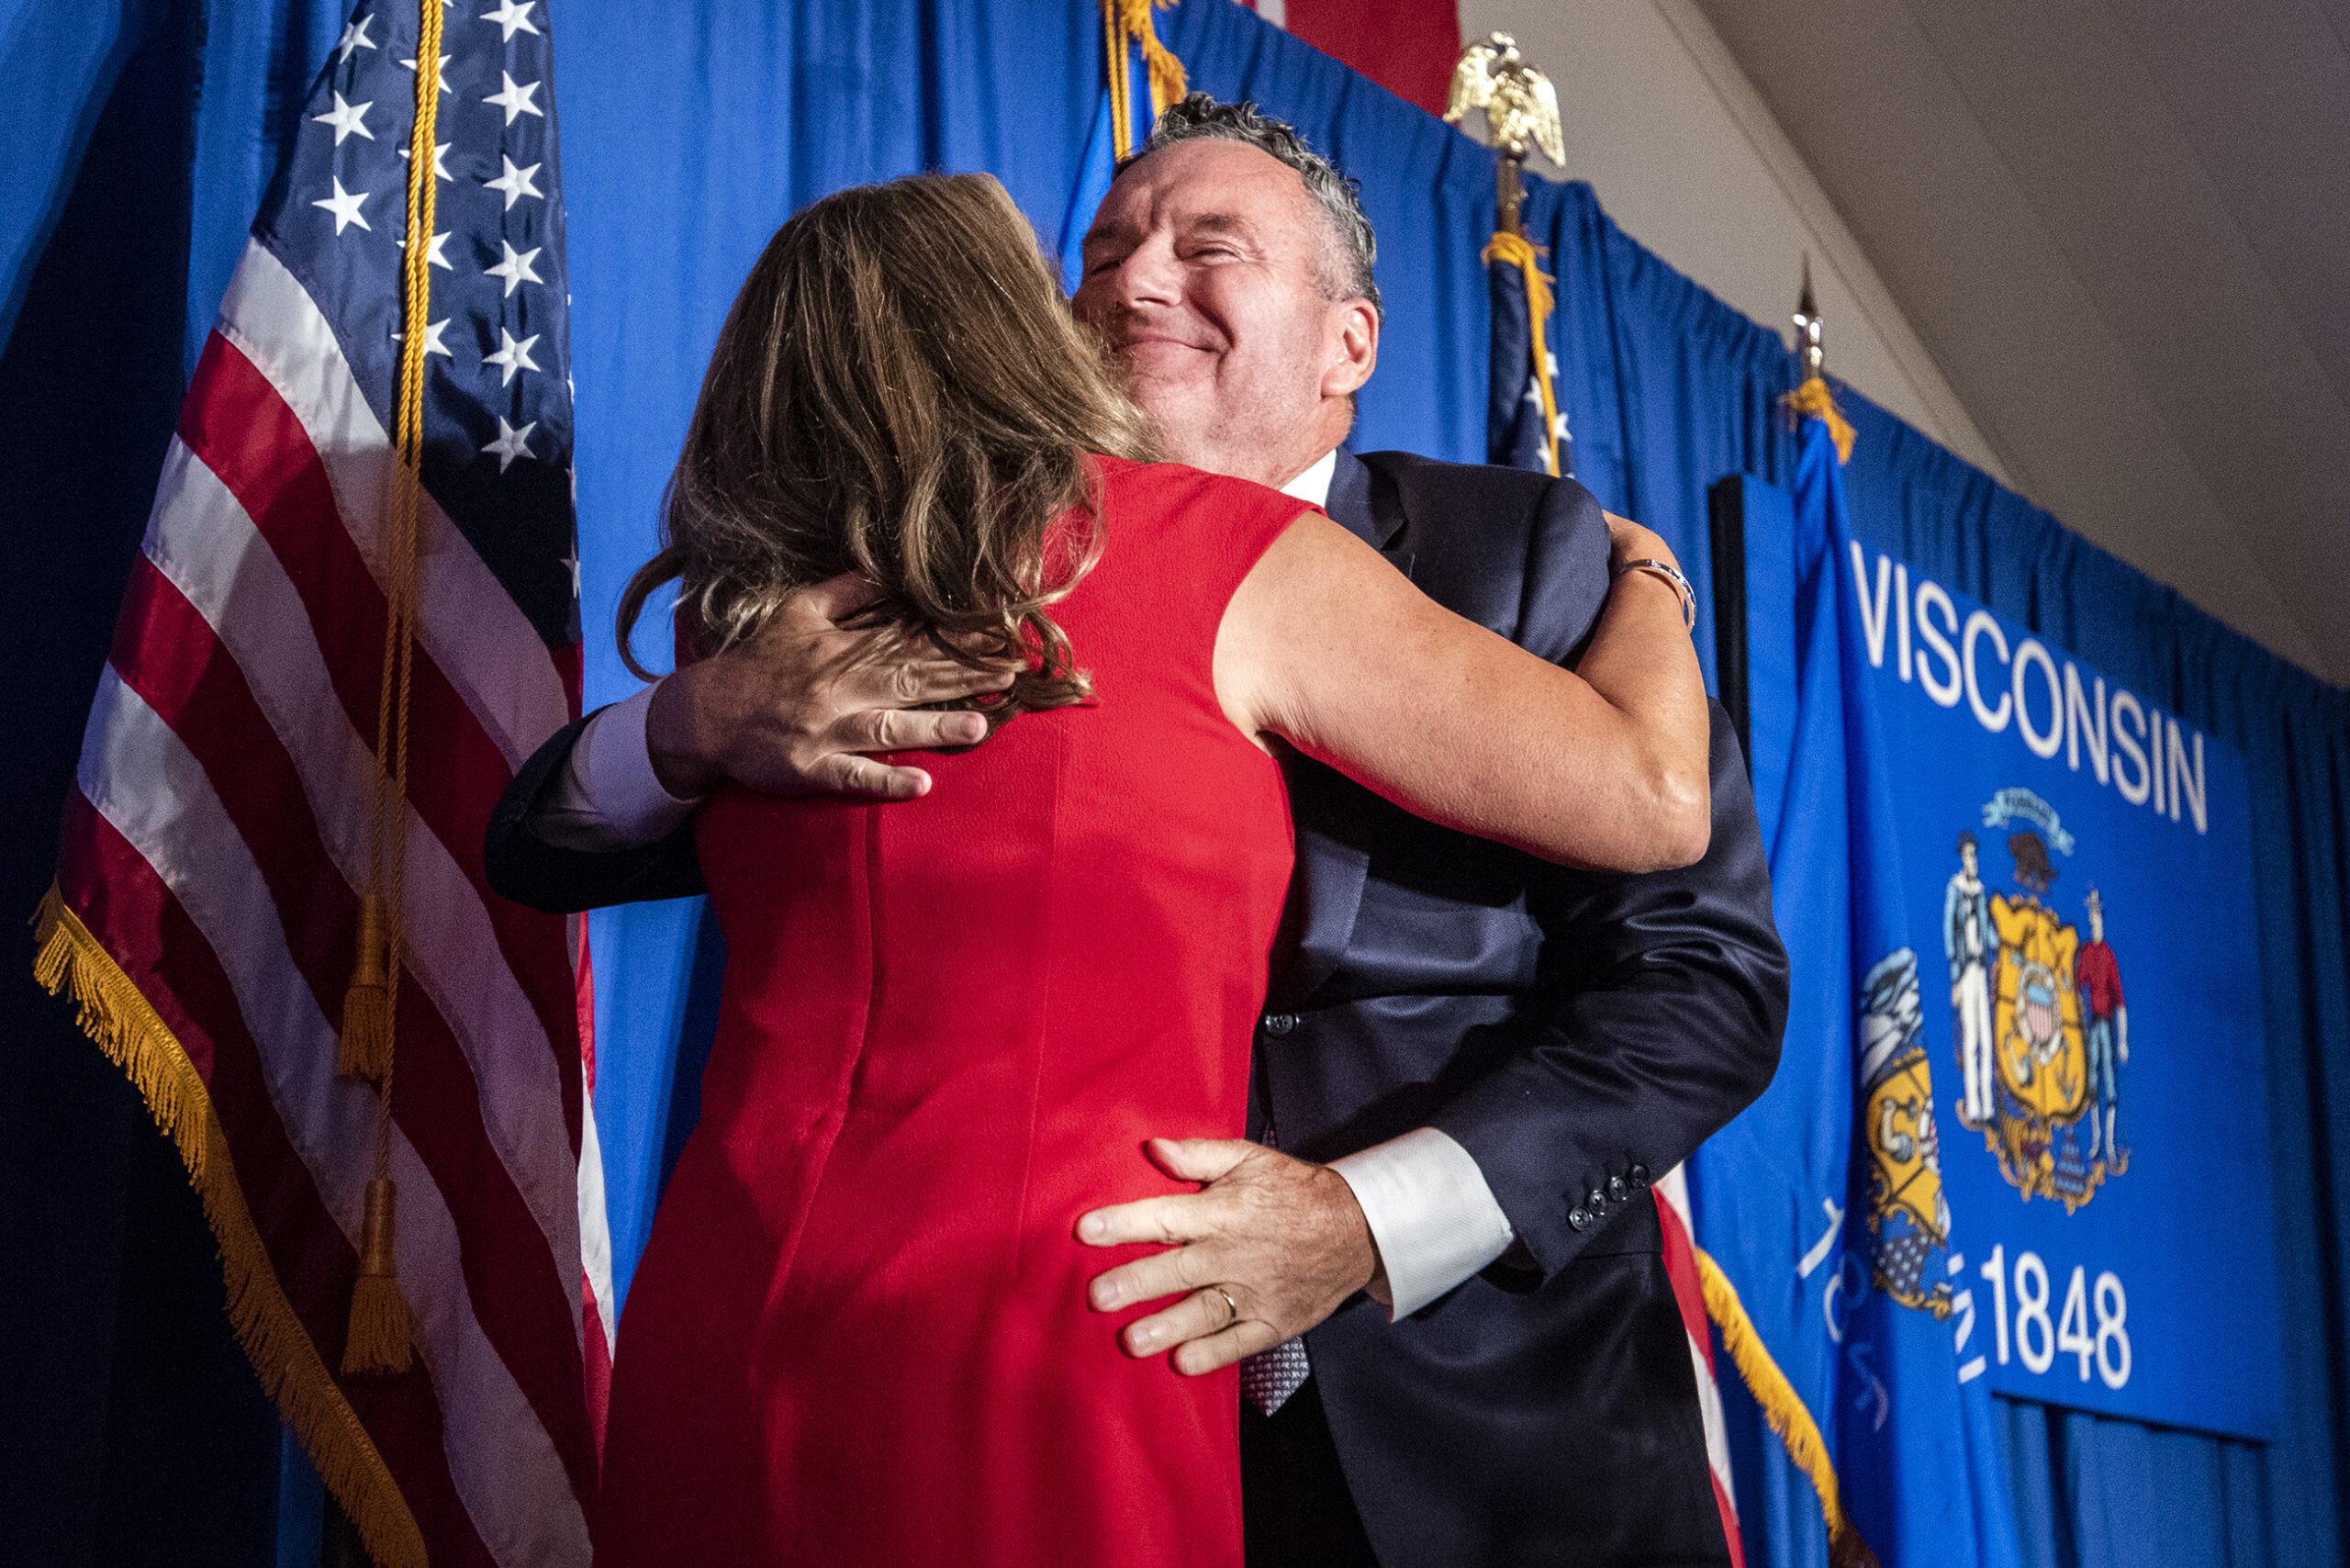 Tim Michels hugs his wife on stage at his event.